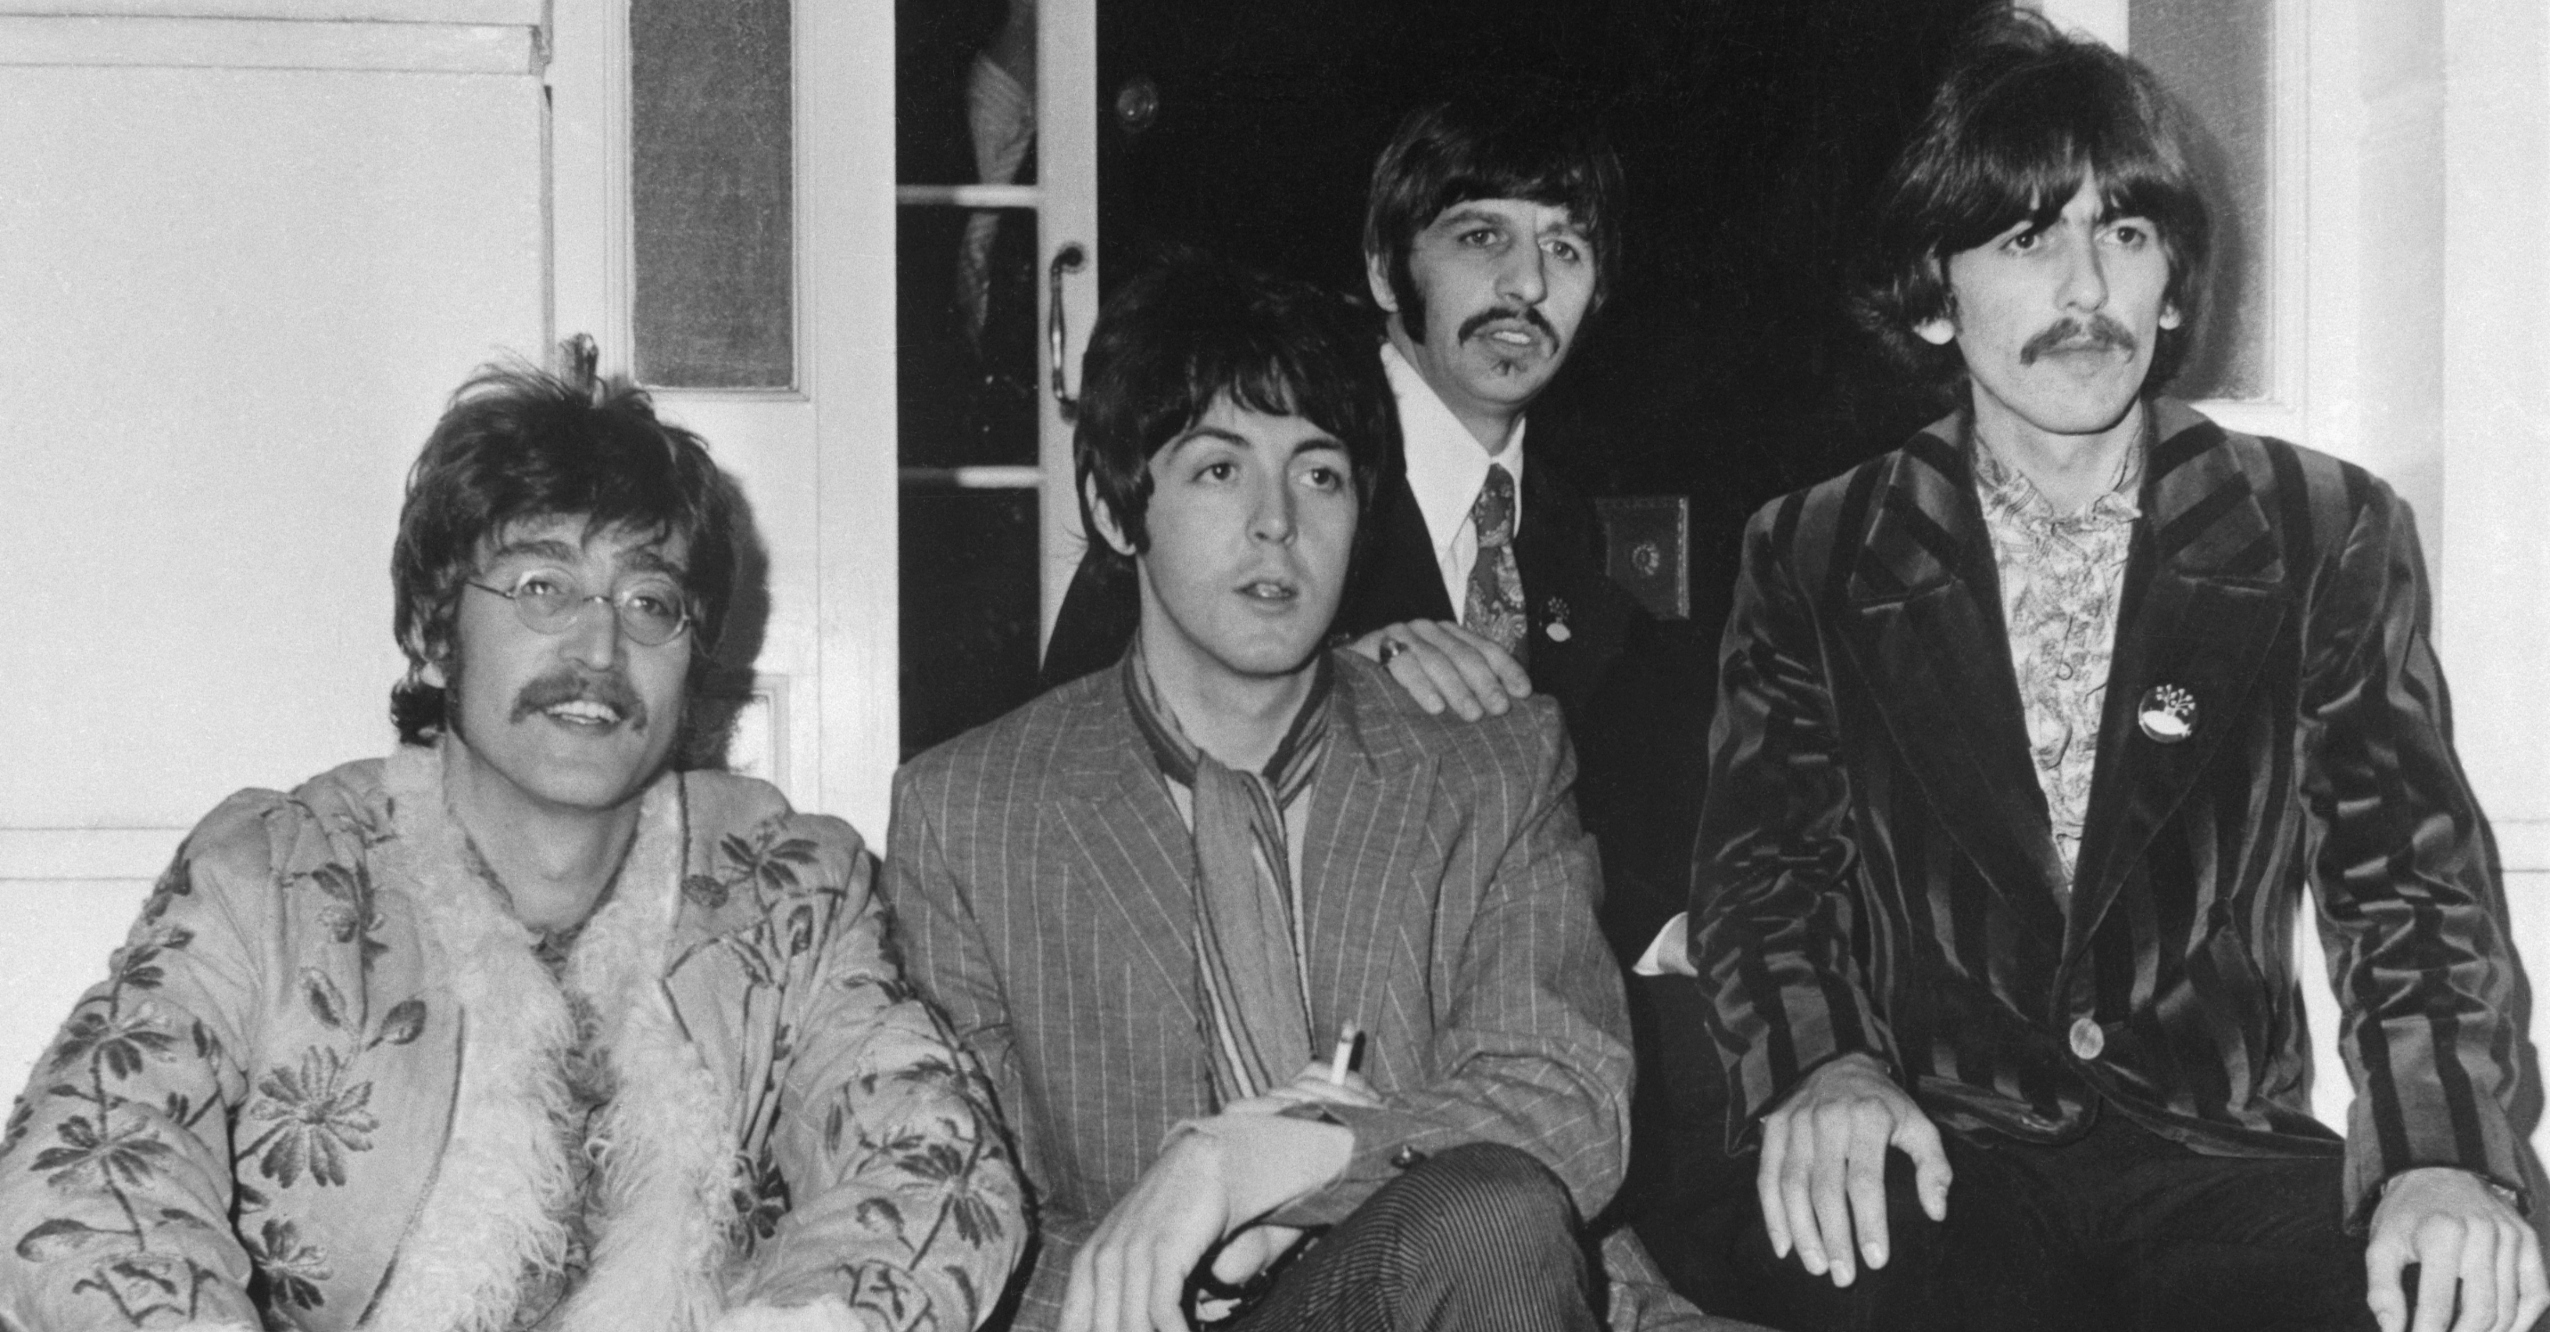 Sam Mendes To Direct 4 Separate Beatles Movies About John Lennon, Paul McCartney, George Harrison &amp; Ringo Starr